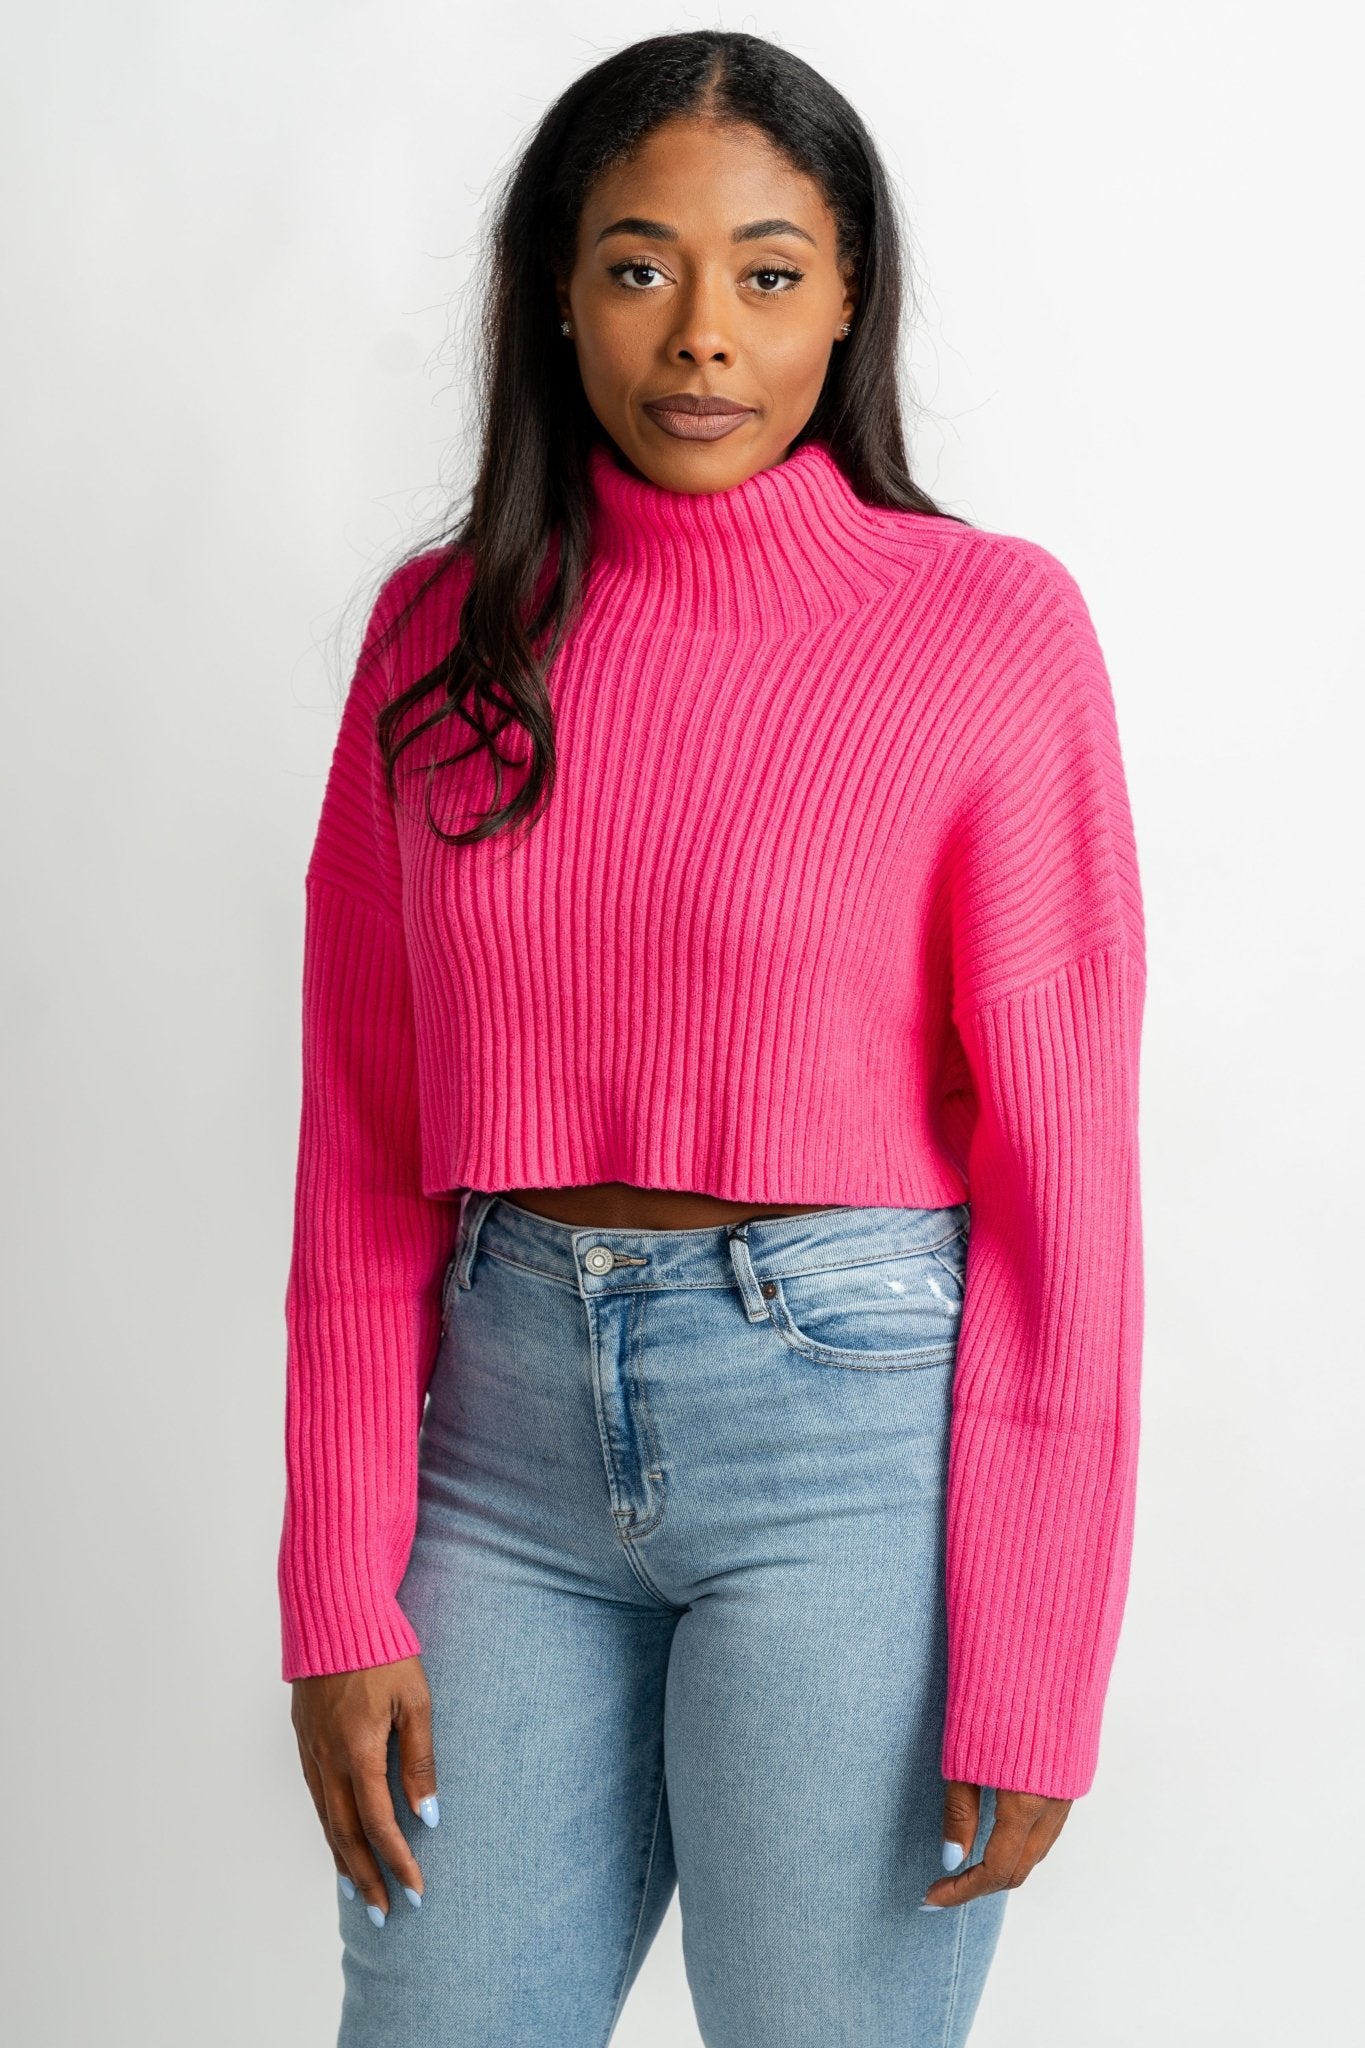 Crop turtleneck sweater pink – Stylish Sweaters | Boutique Sweaters at Lush Fashion Lounge Boutique in Oklahoma City